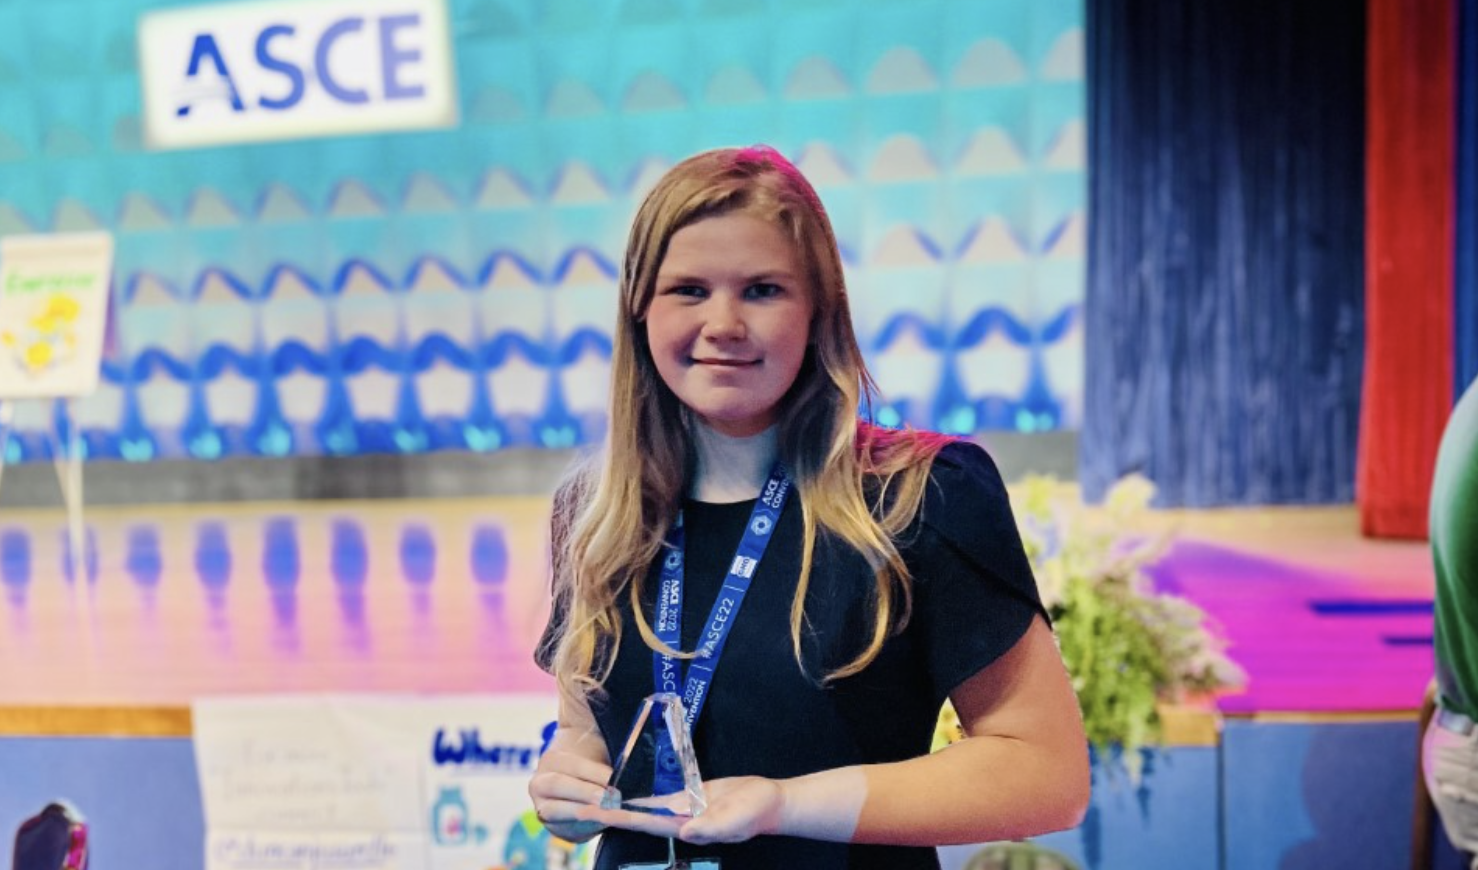 18-year-old civil and environmental engineering junior Morgan Burk was one of two Auburn students taking home first place in the ASCE Innovation Contest at the recent ASCE 2022 Convention in Anaheim, California.